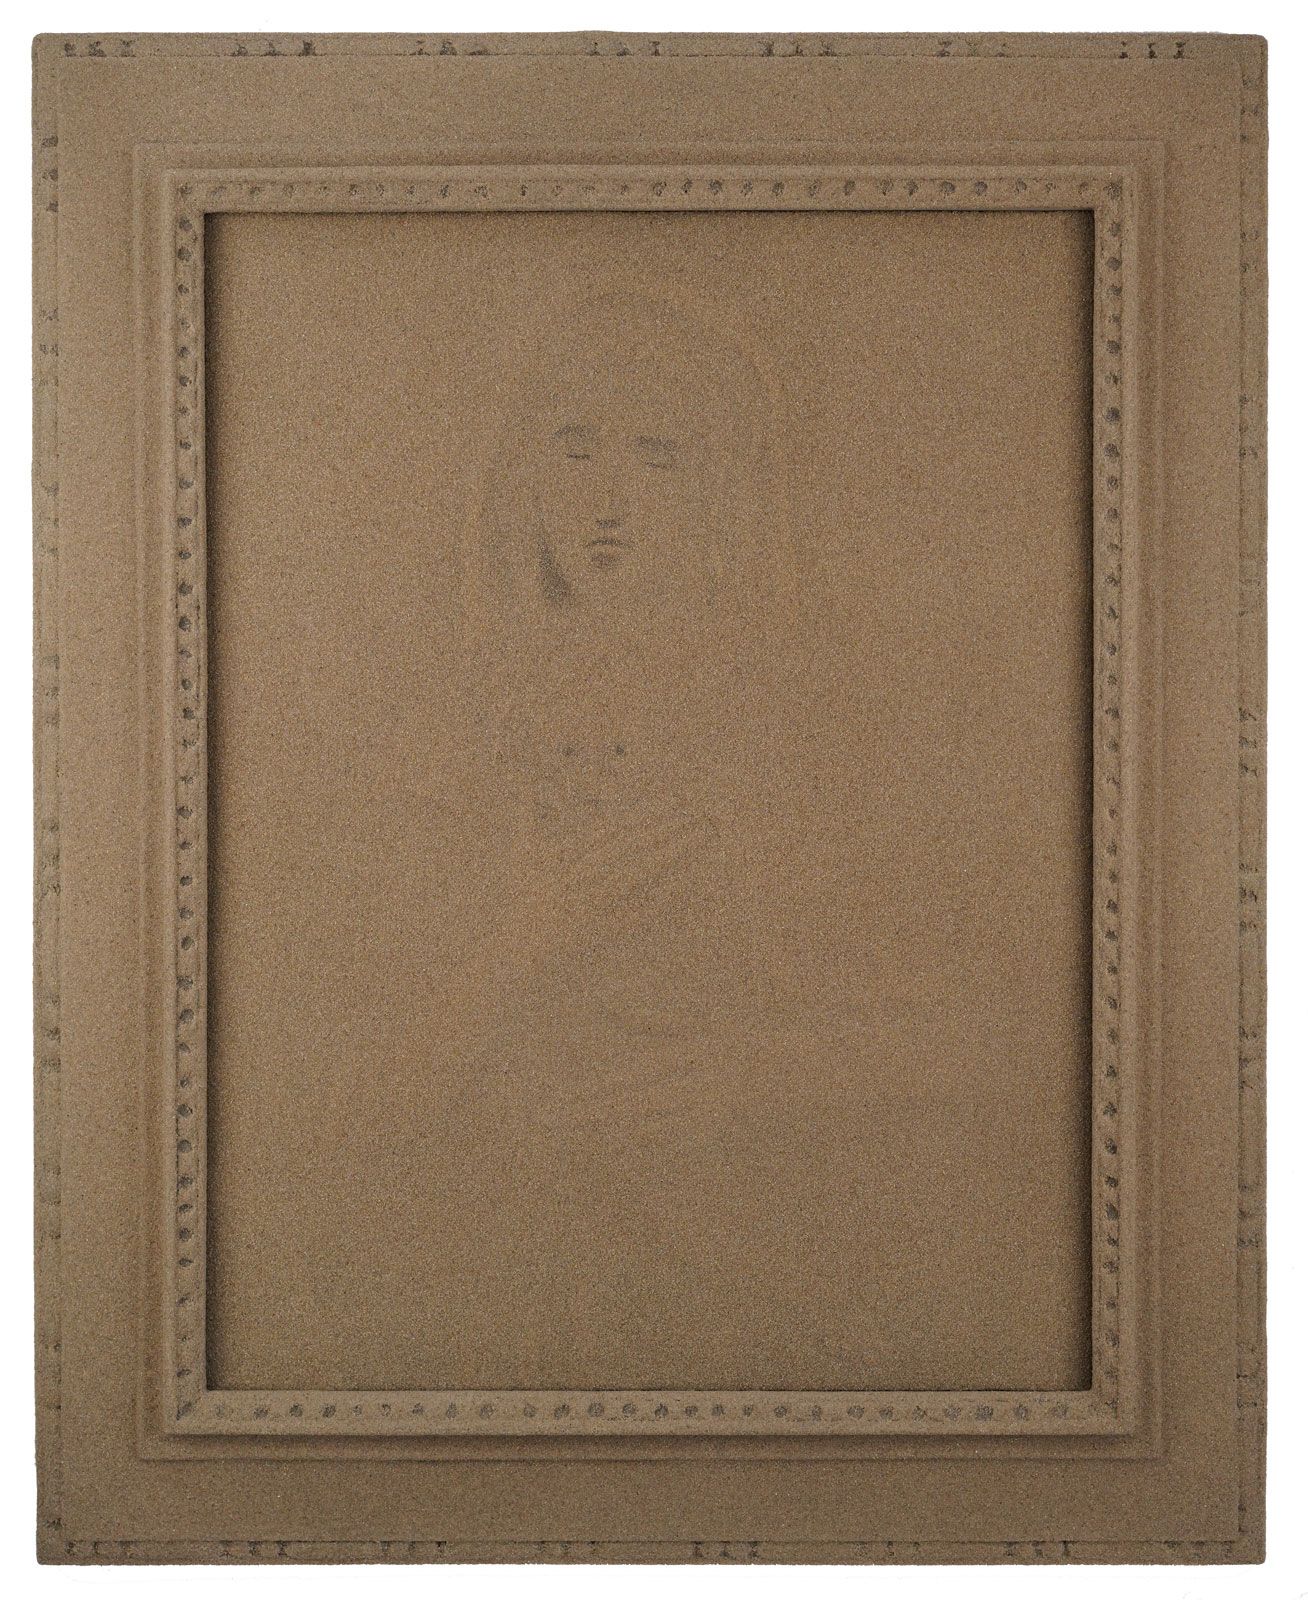 Faded Madonna and child painted in sand by British artist Mark Alexander.